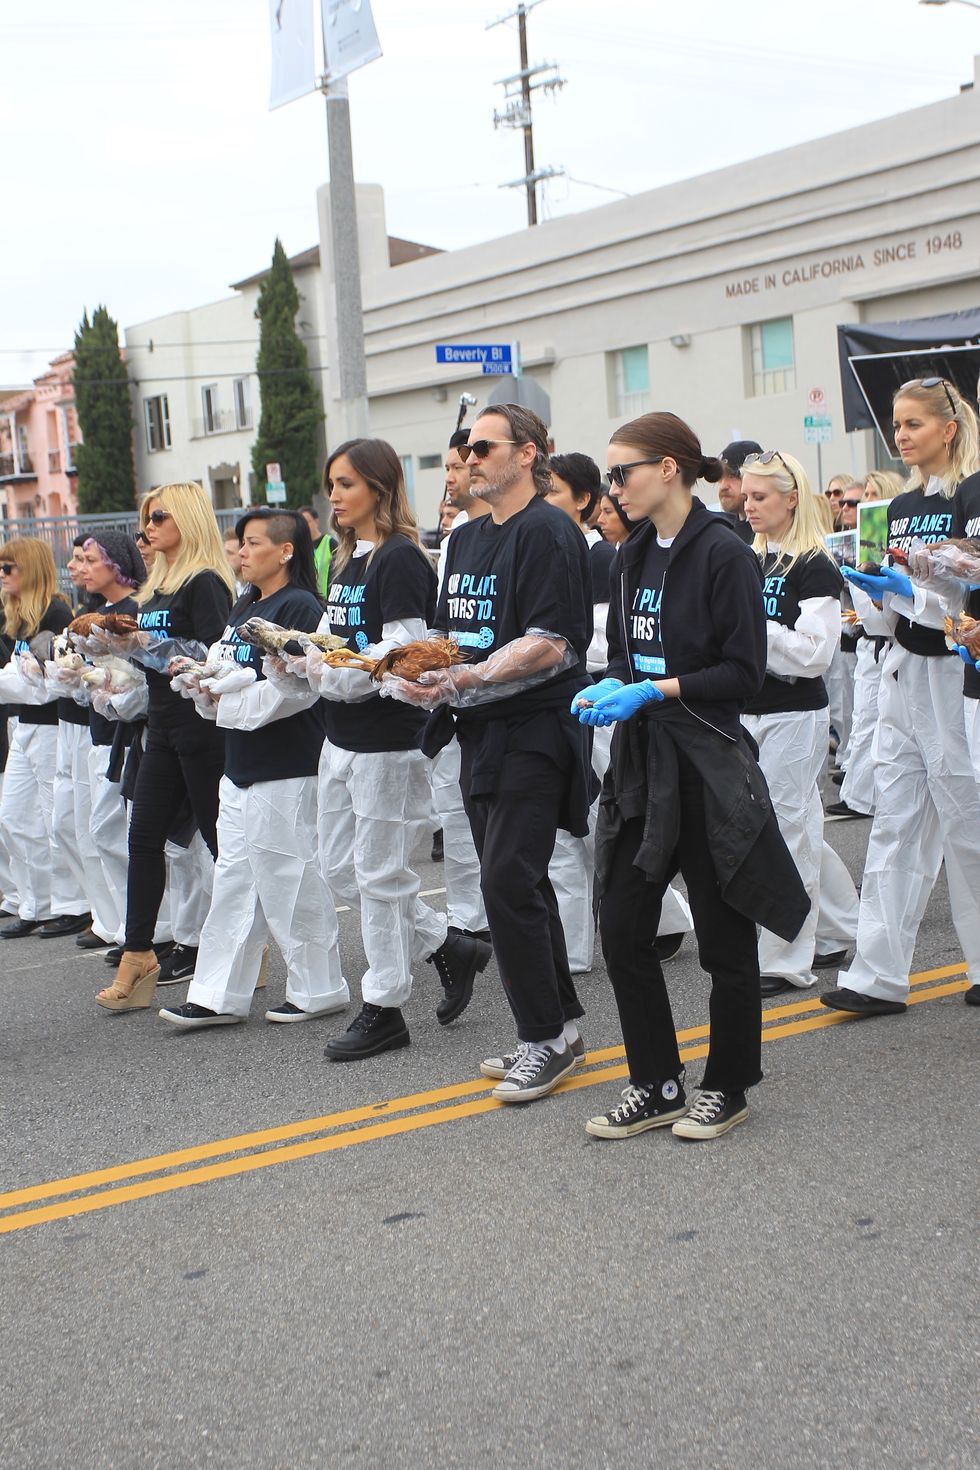 Joaquin Phoenix and Rooney Mara on National Animal Rights Day on June 2, 2019 at The National Animal Rights Day Demonstration in Los Angeles, California.